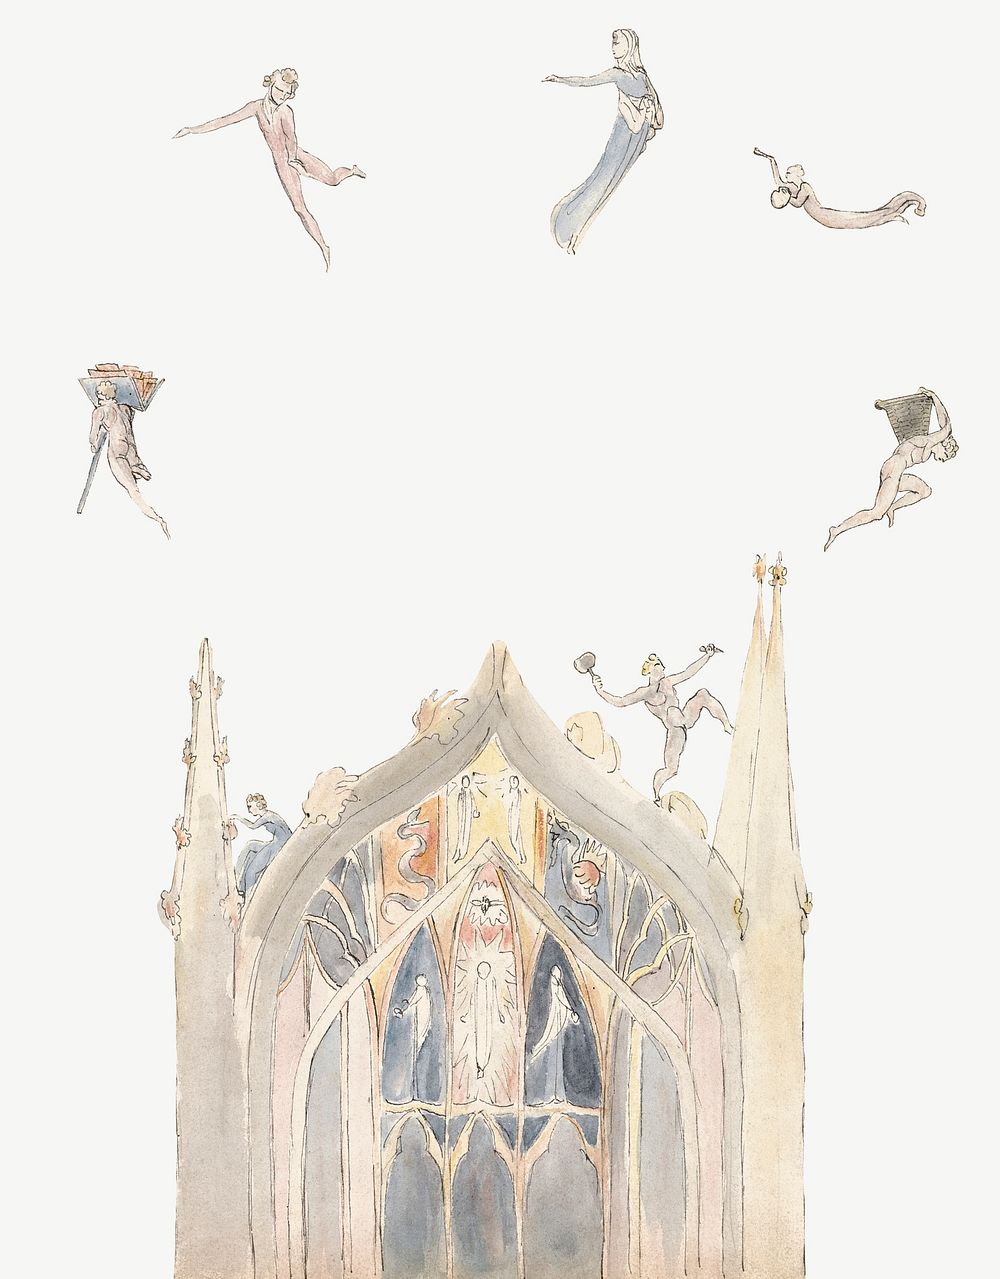 Christian church watercolor illustration element psd. Remixed from vintage artwork by rawpixel.